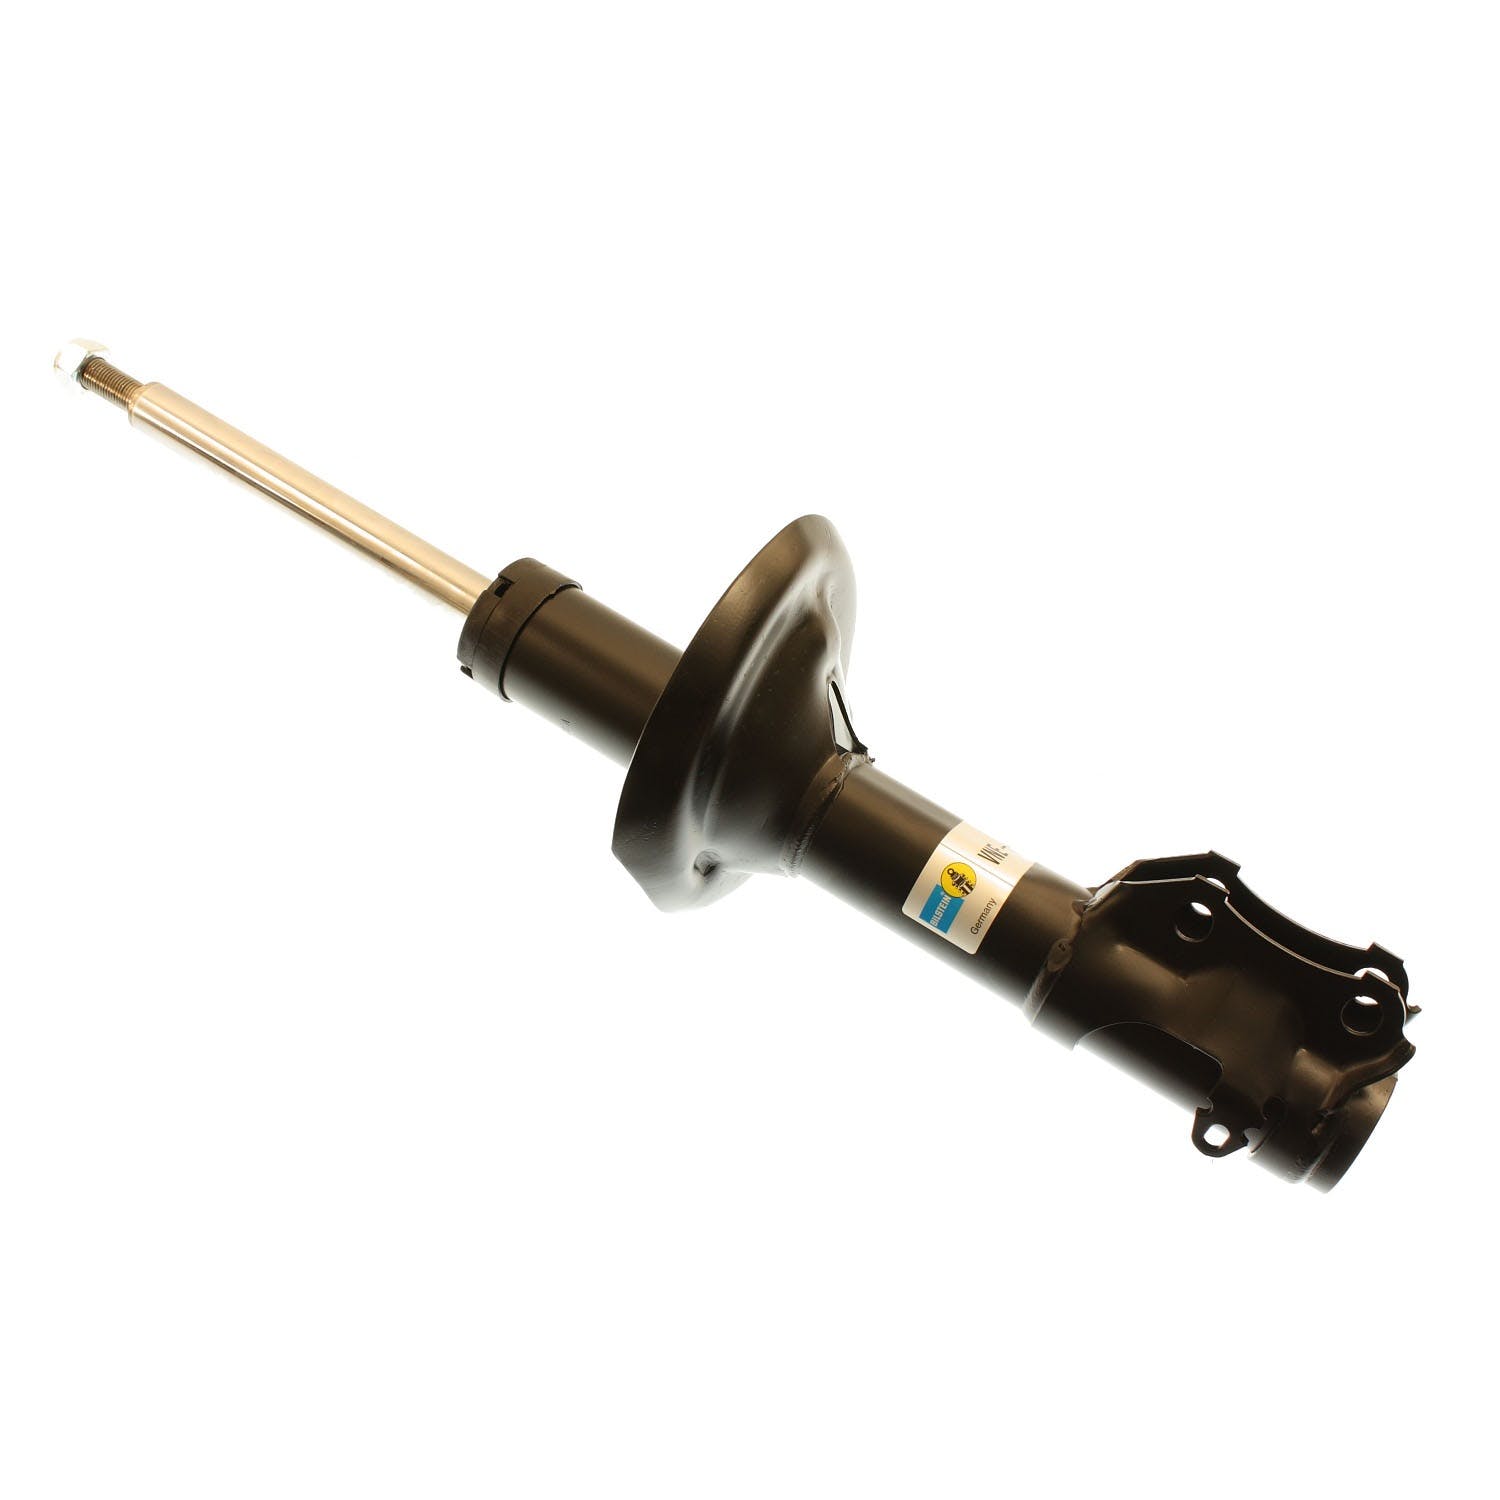 Bilstein 22-045010 B4 OE Replacement-Suspension Strut Assembly